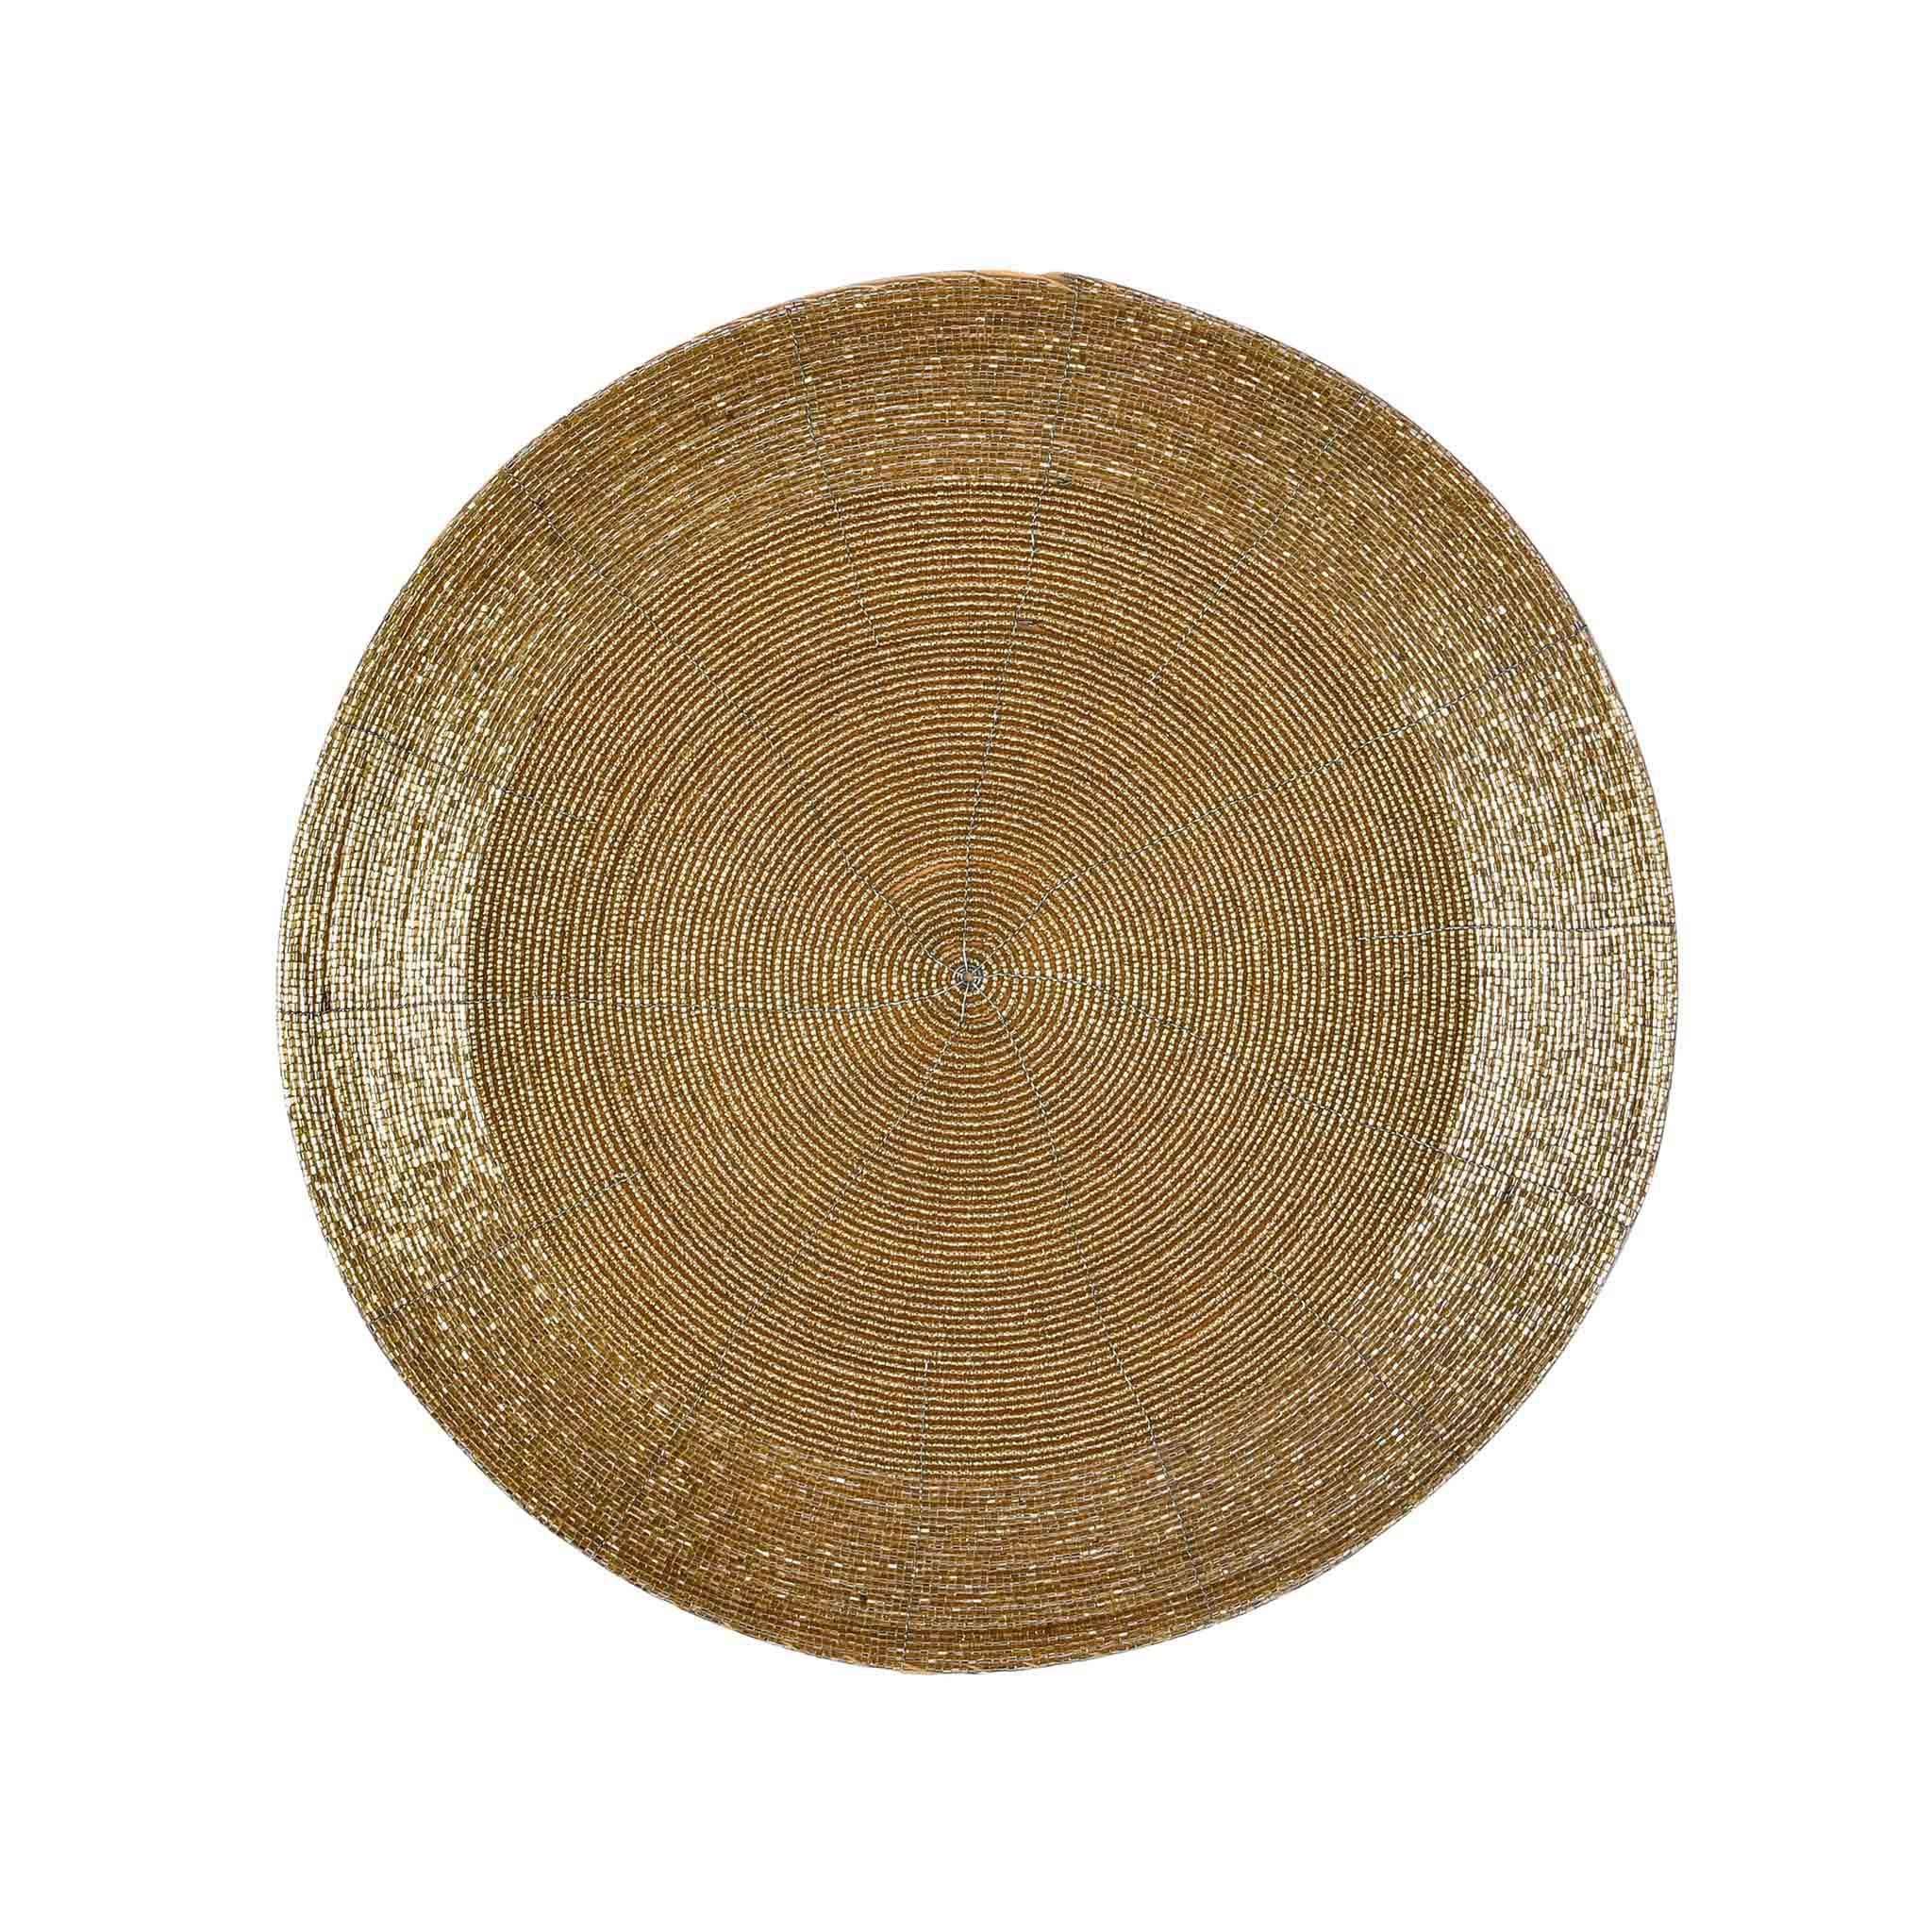 Glass Beaded Placemat <br>Color: Gold Two-Tone<br>Size: 14" Round<br>Set of 4 - Trunkin' USA